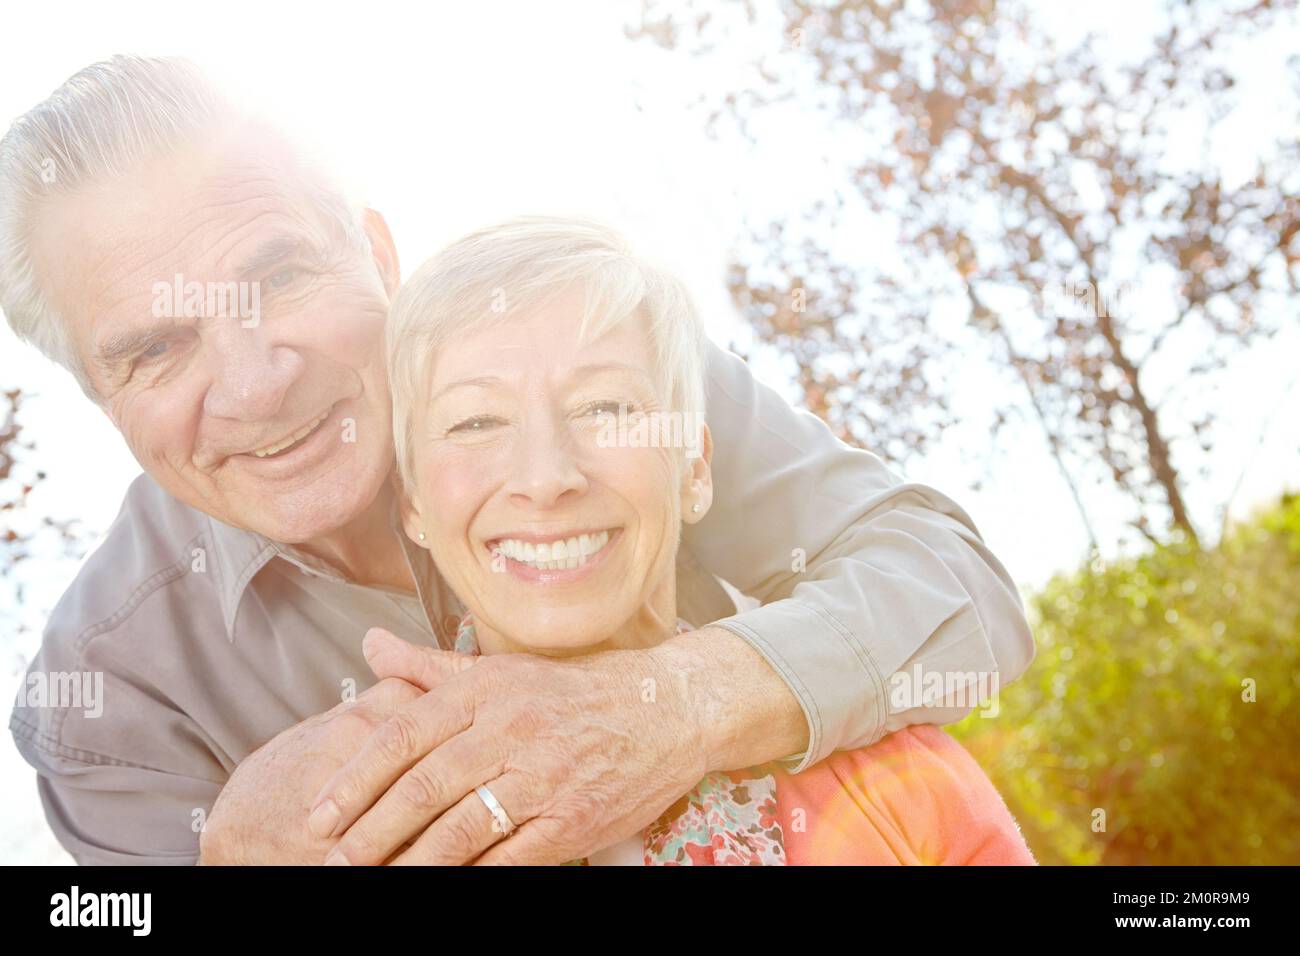 Happily married. A senior married couple spending a day at the park. Stock Photo